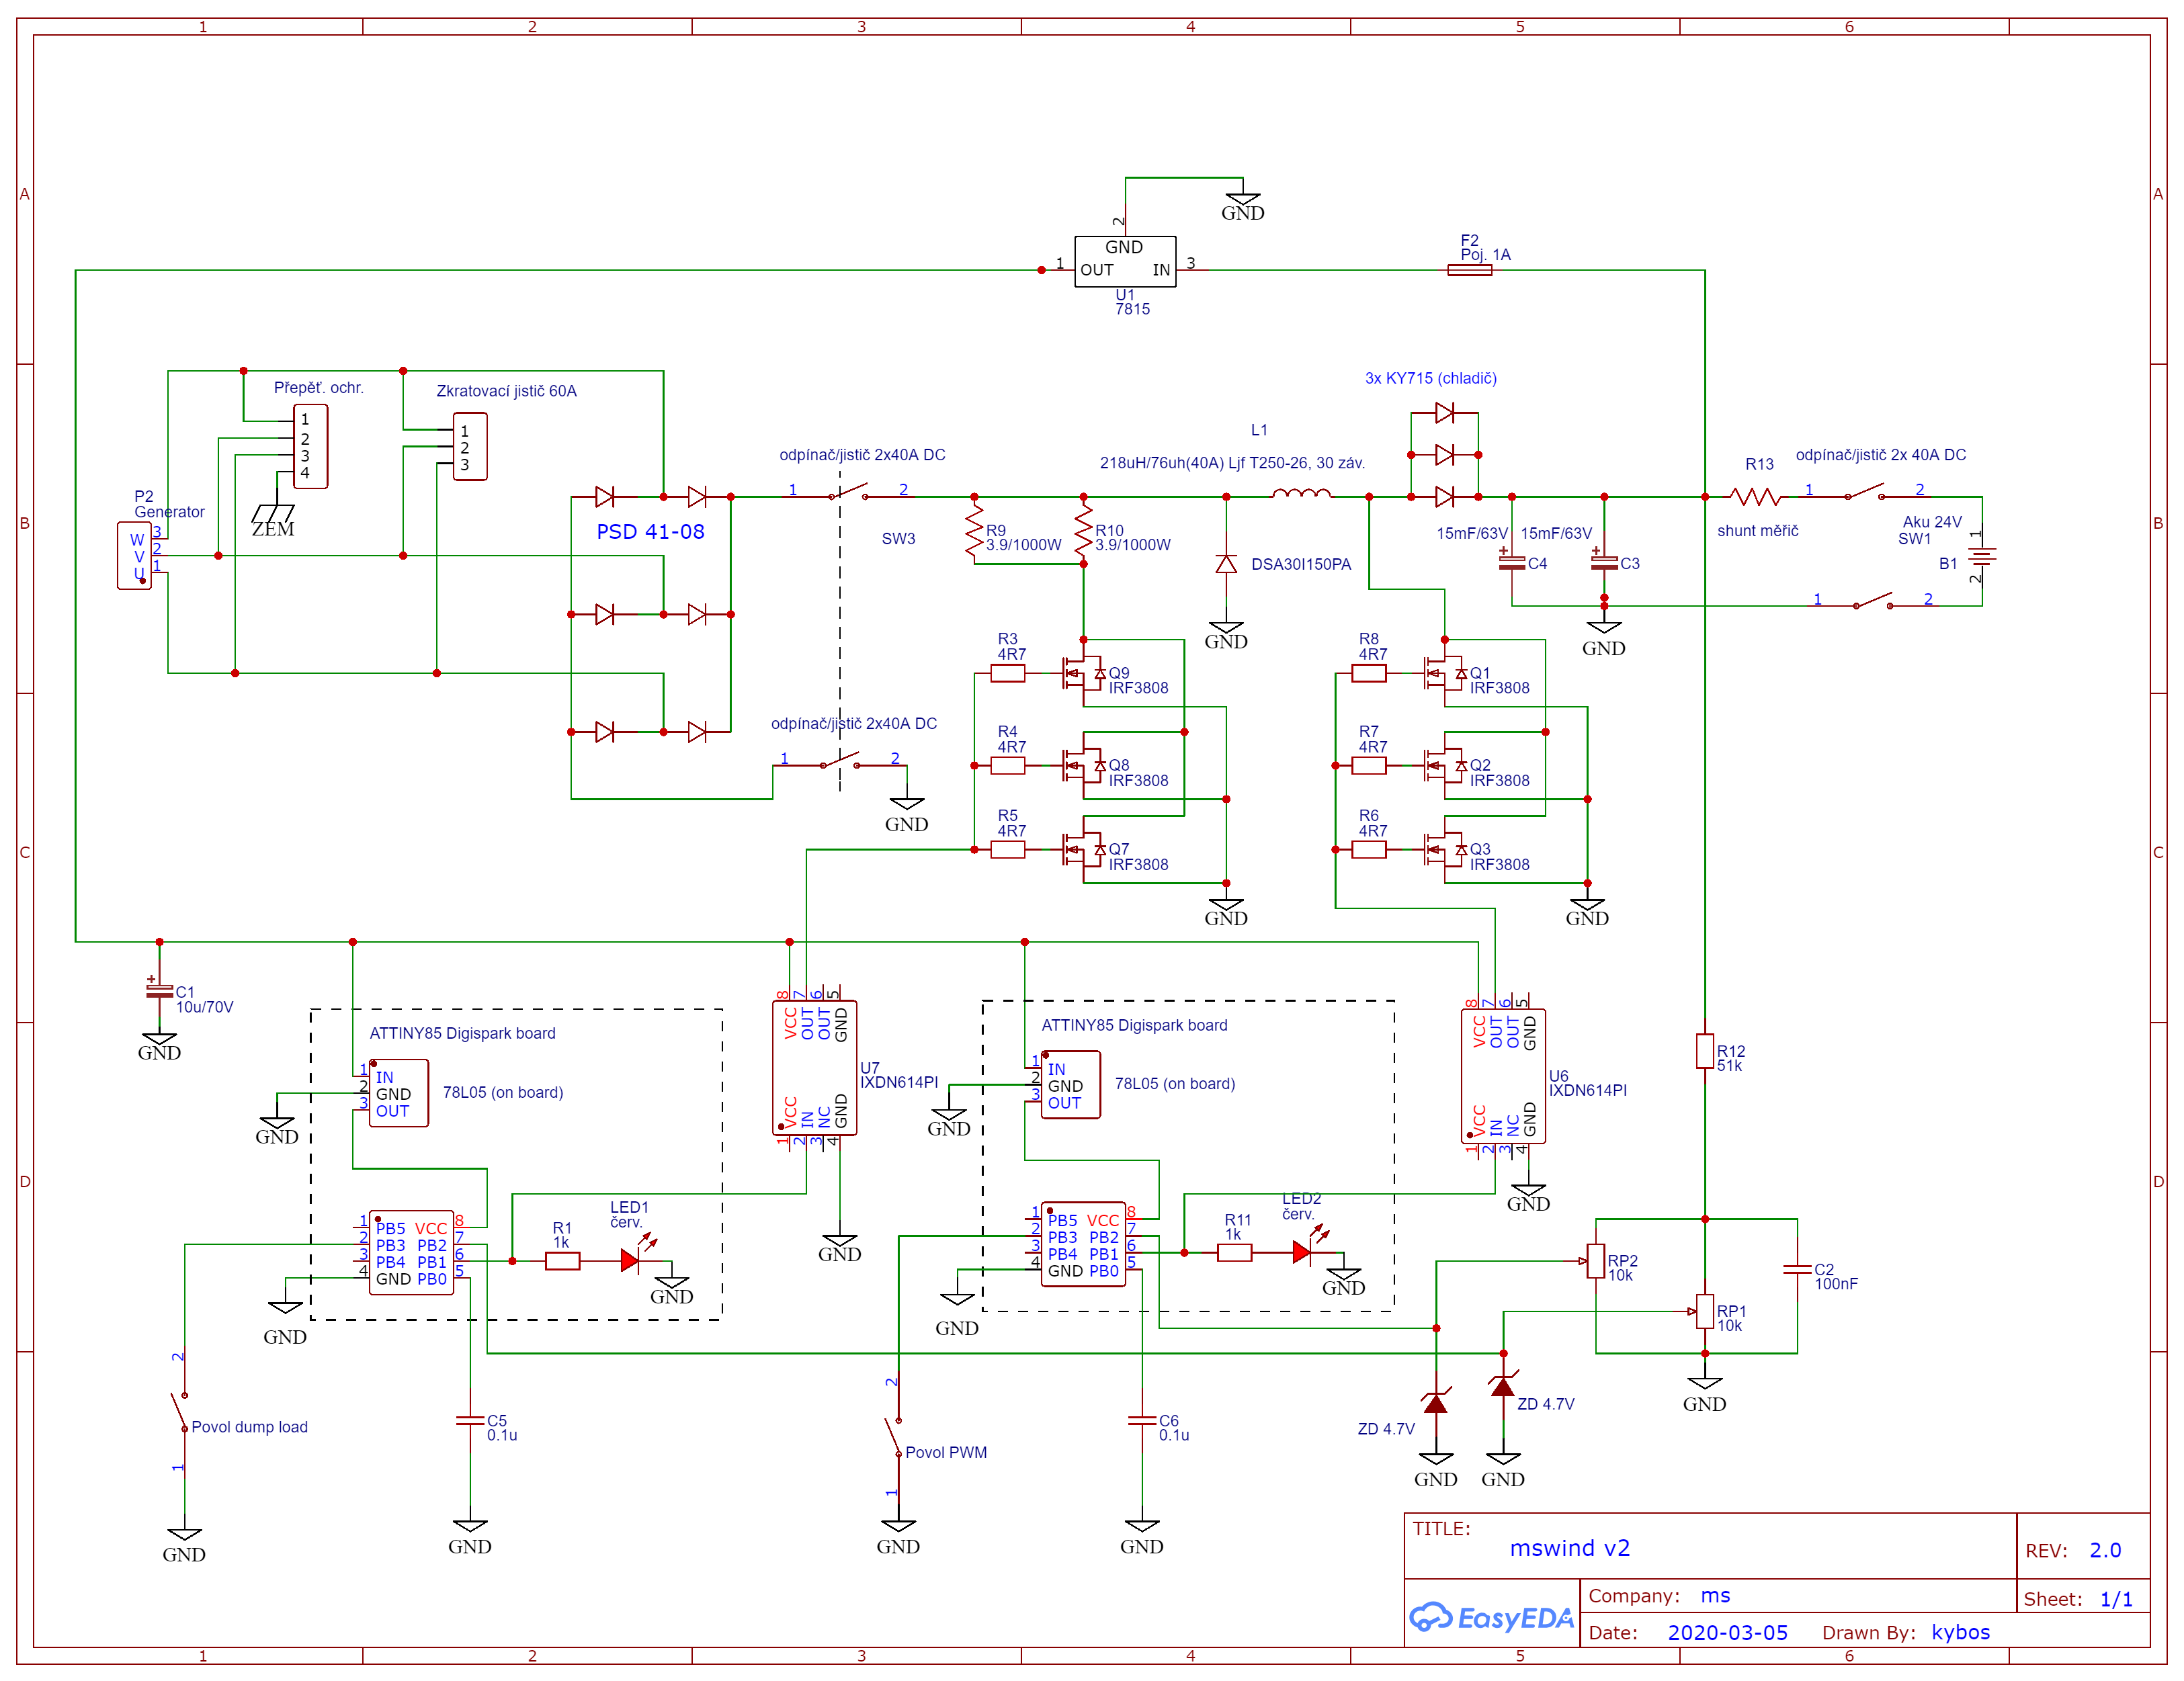 Schematic_mswind_v2_2021-10-29.png